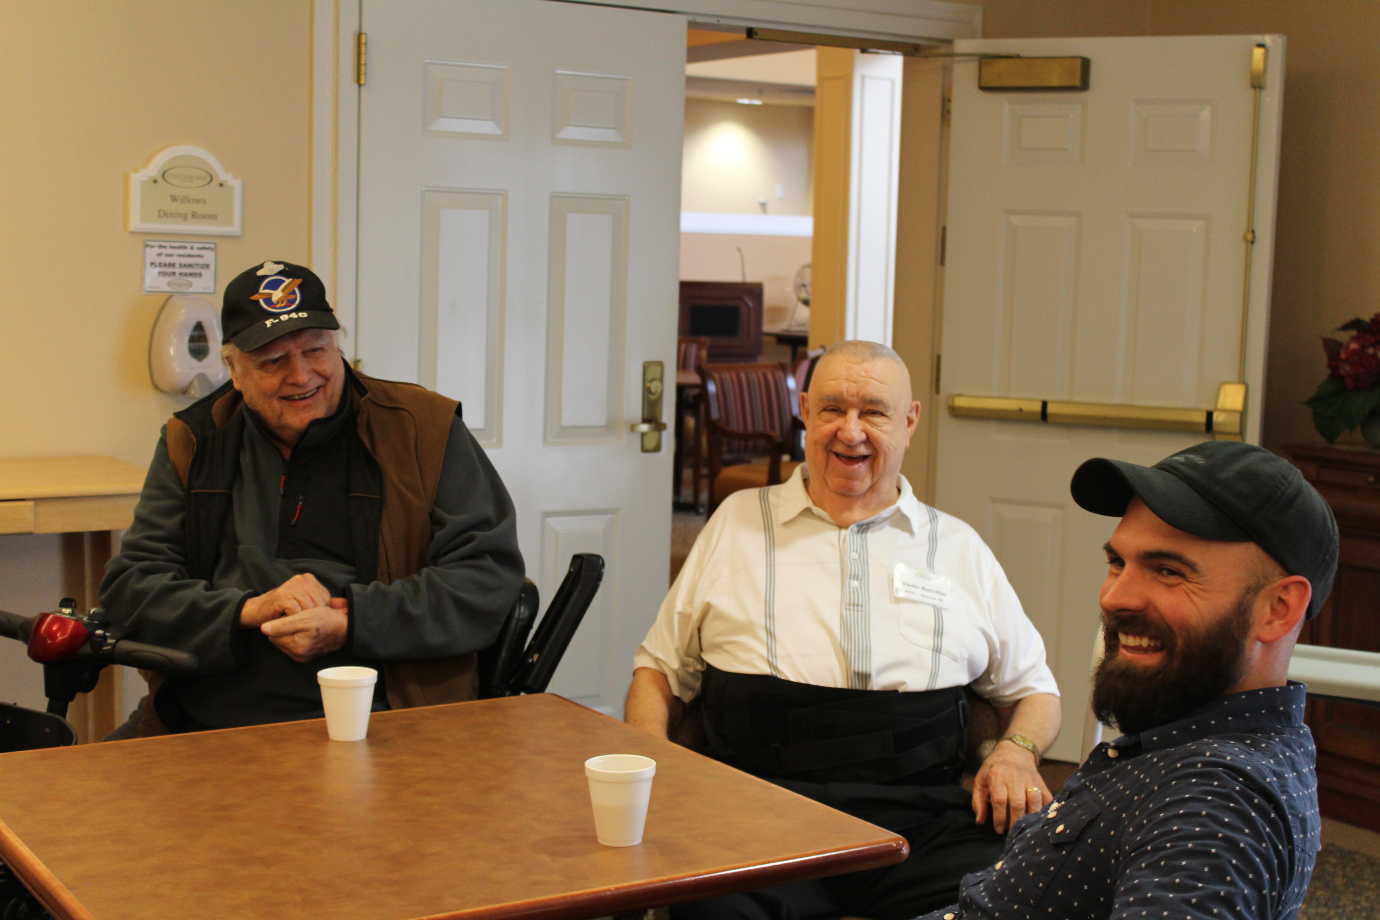 Project Unpack helped veterans make connections across generations. Here, two Vietnam veterans engage in lively conversation with Josh Zeiss, an artist and veteran of Iraq. Image courtesy of Project Unpack.